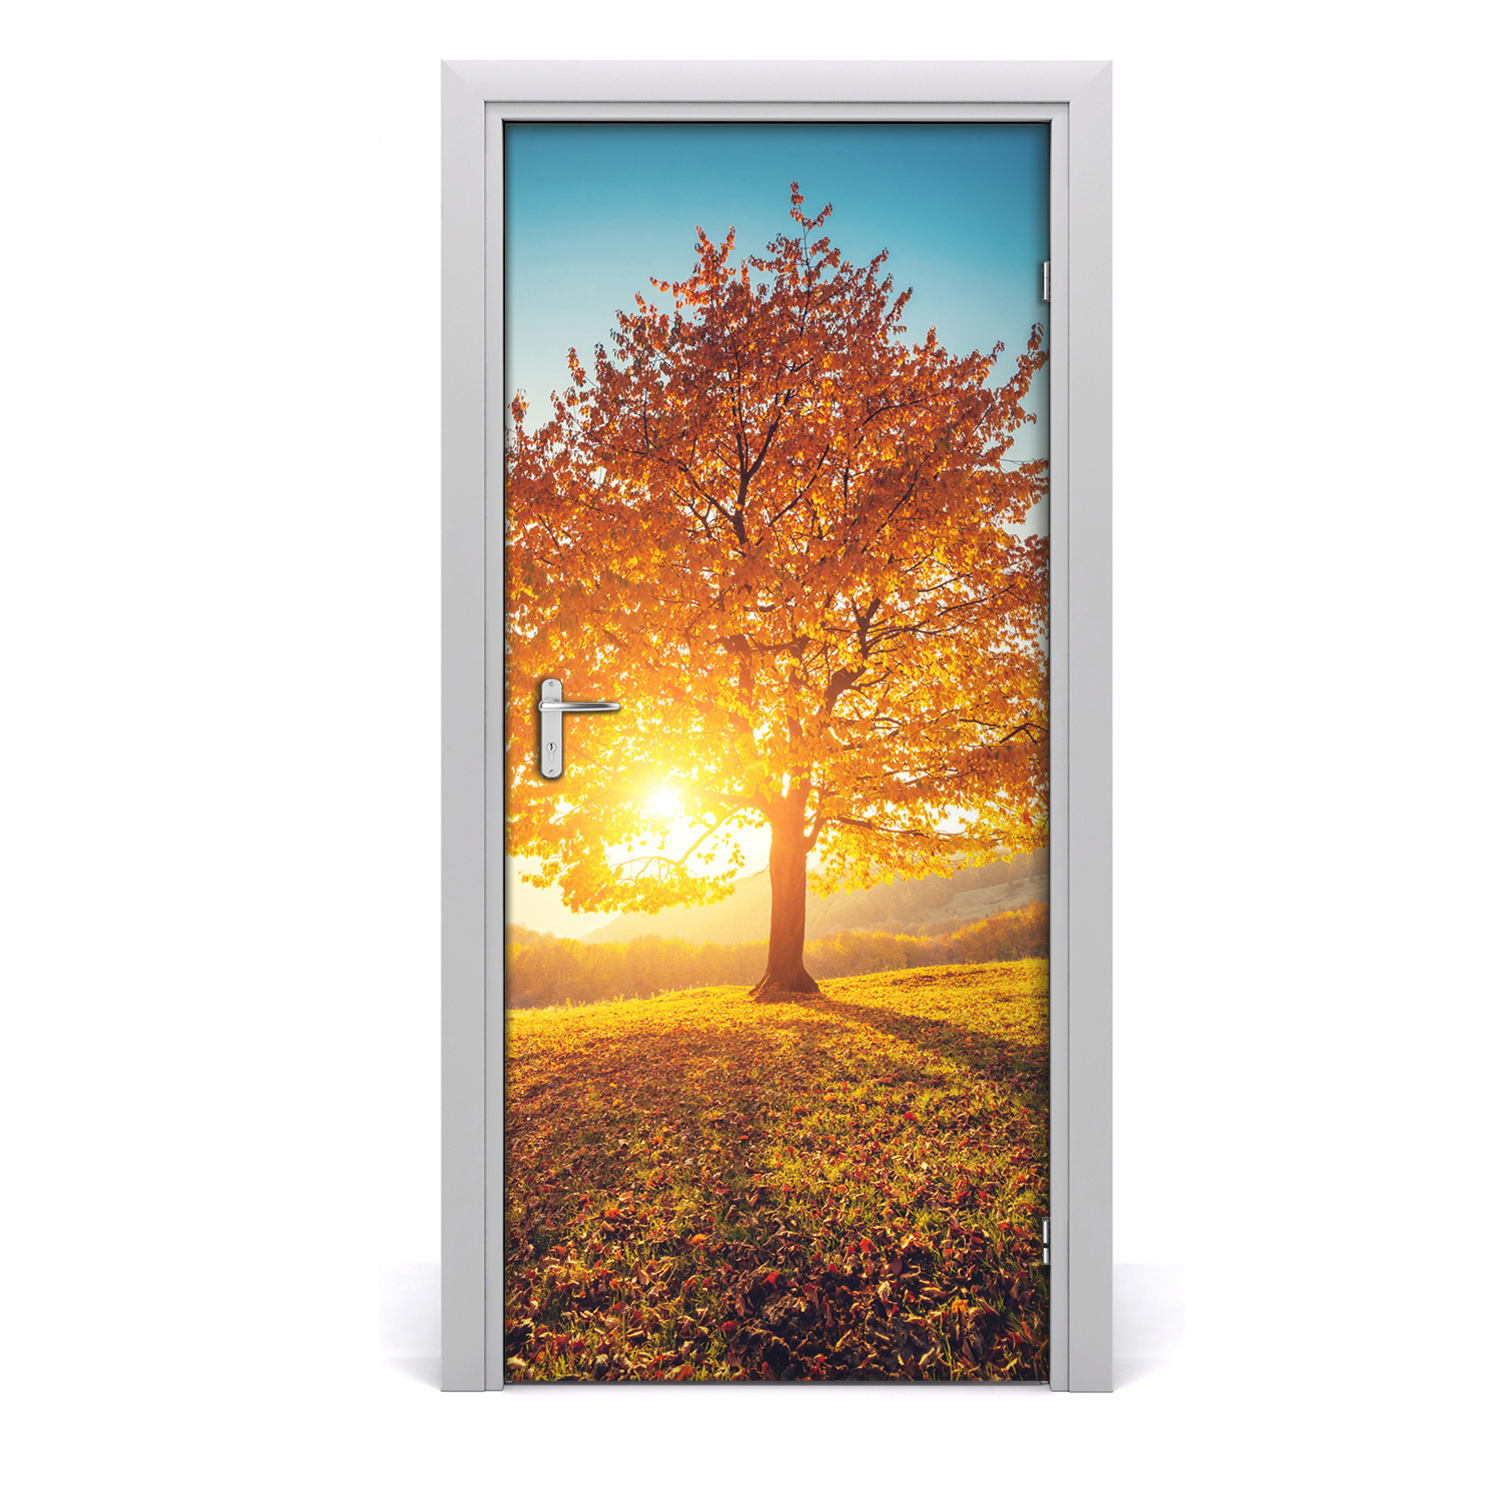 Details about  / Self adhesive Door Wall wrap removable Peel /& Stick Landscapes Autumn forest